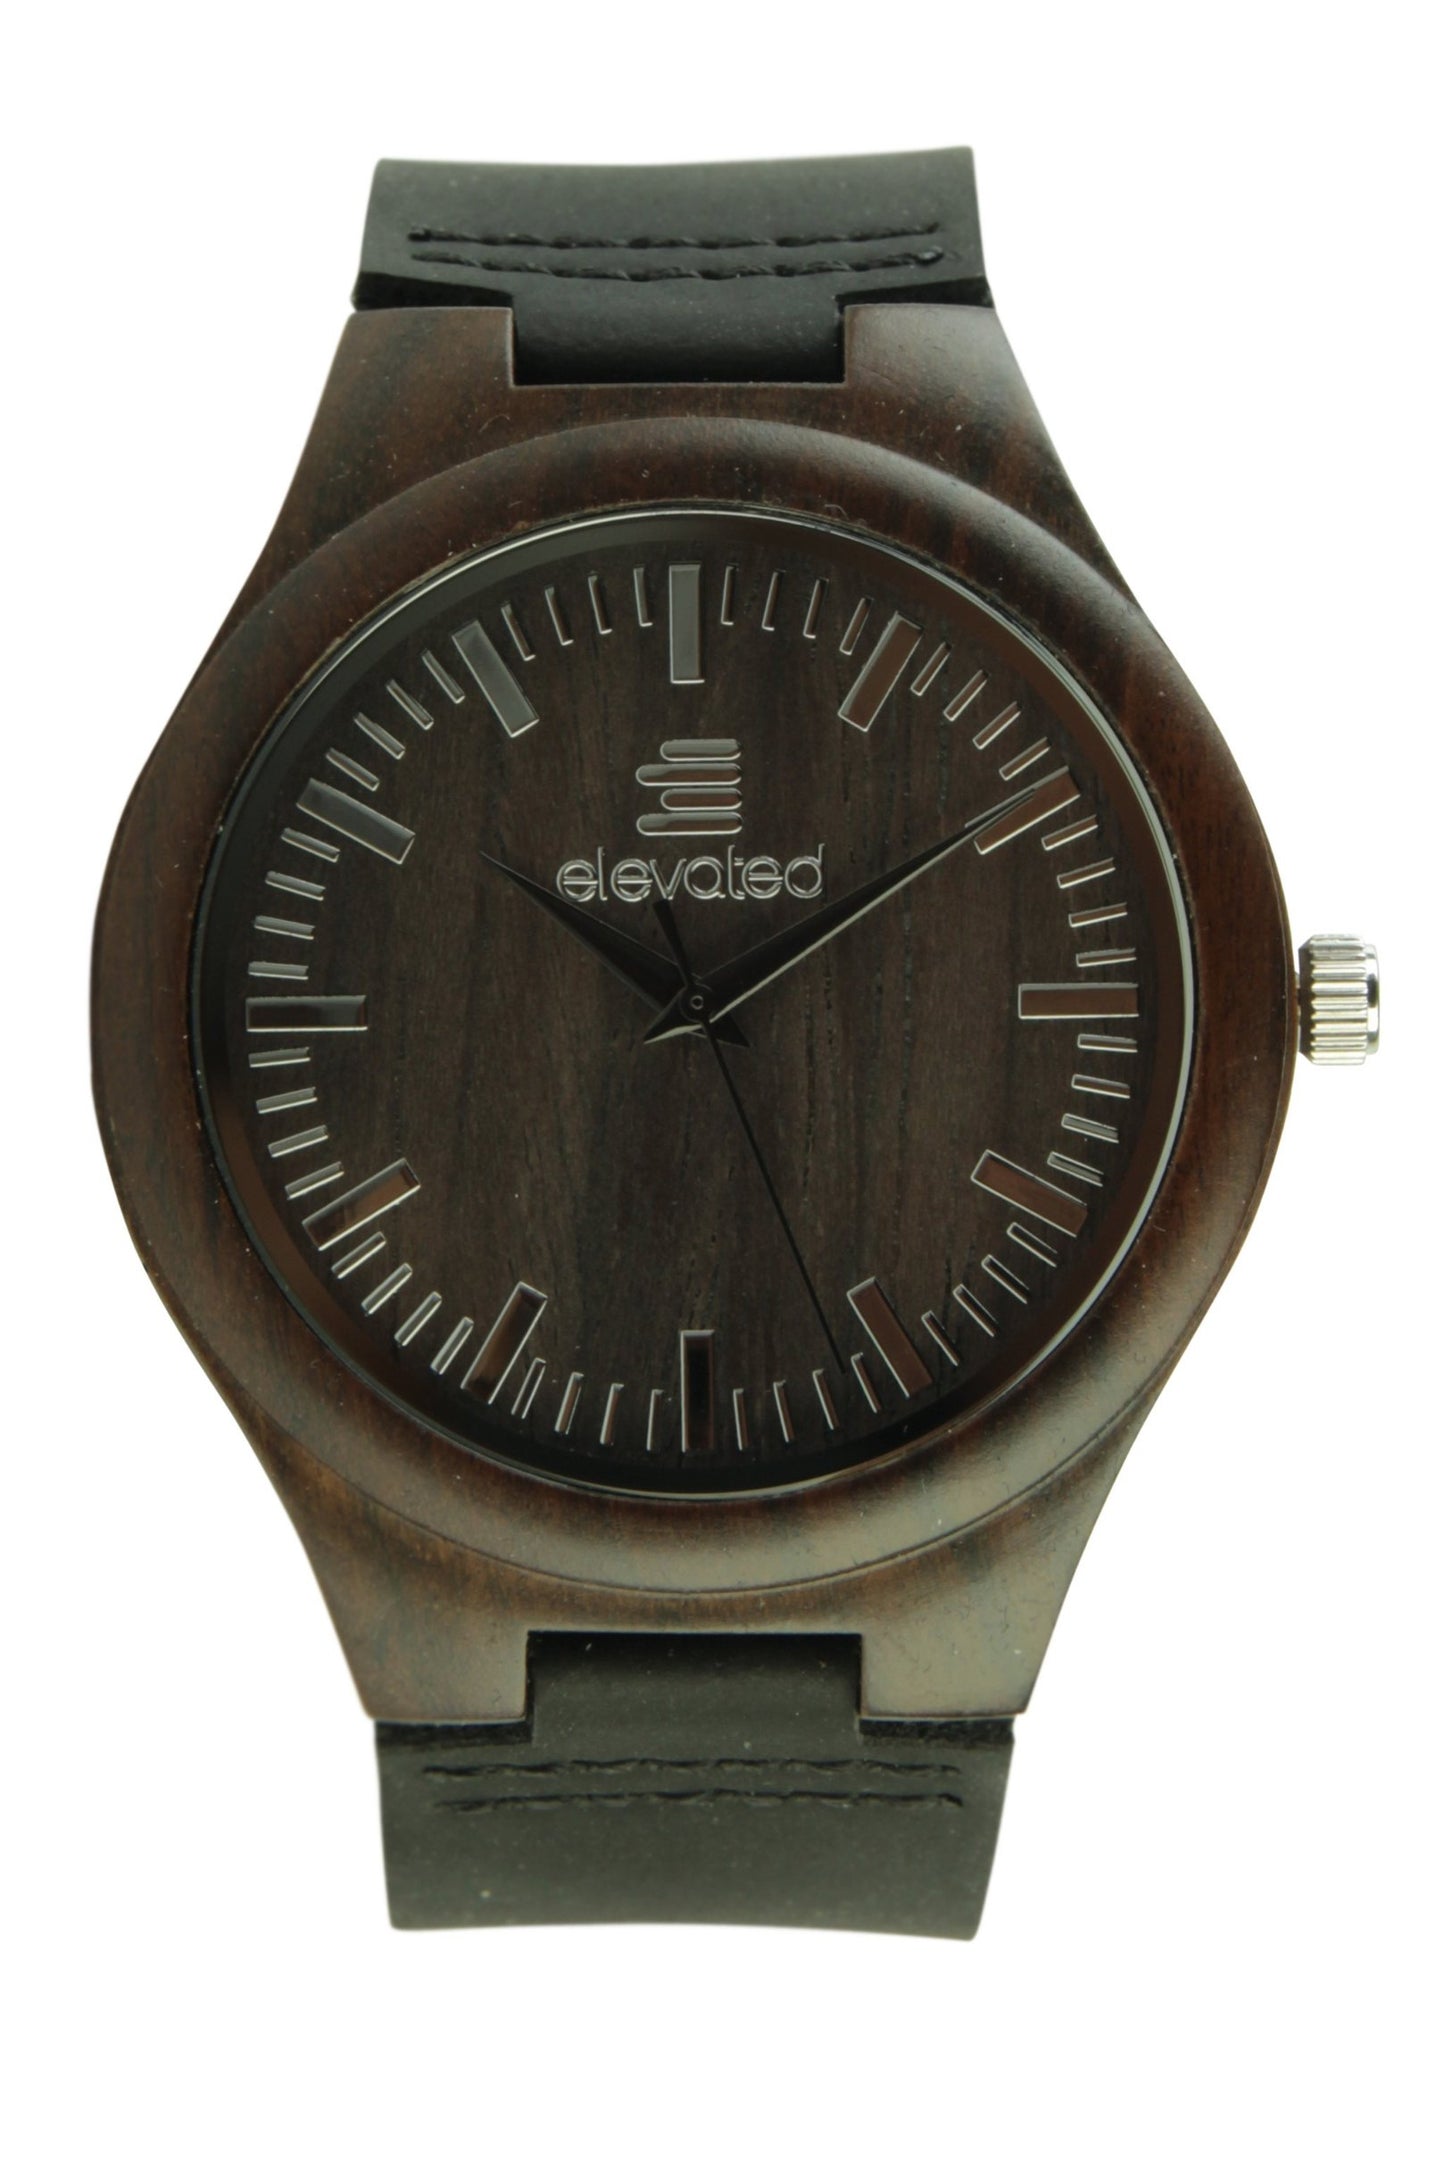 MAMBA WOOD WATCH BY ELEVATED SHADES